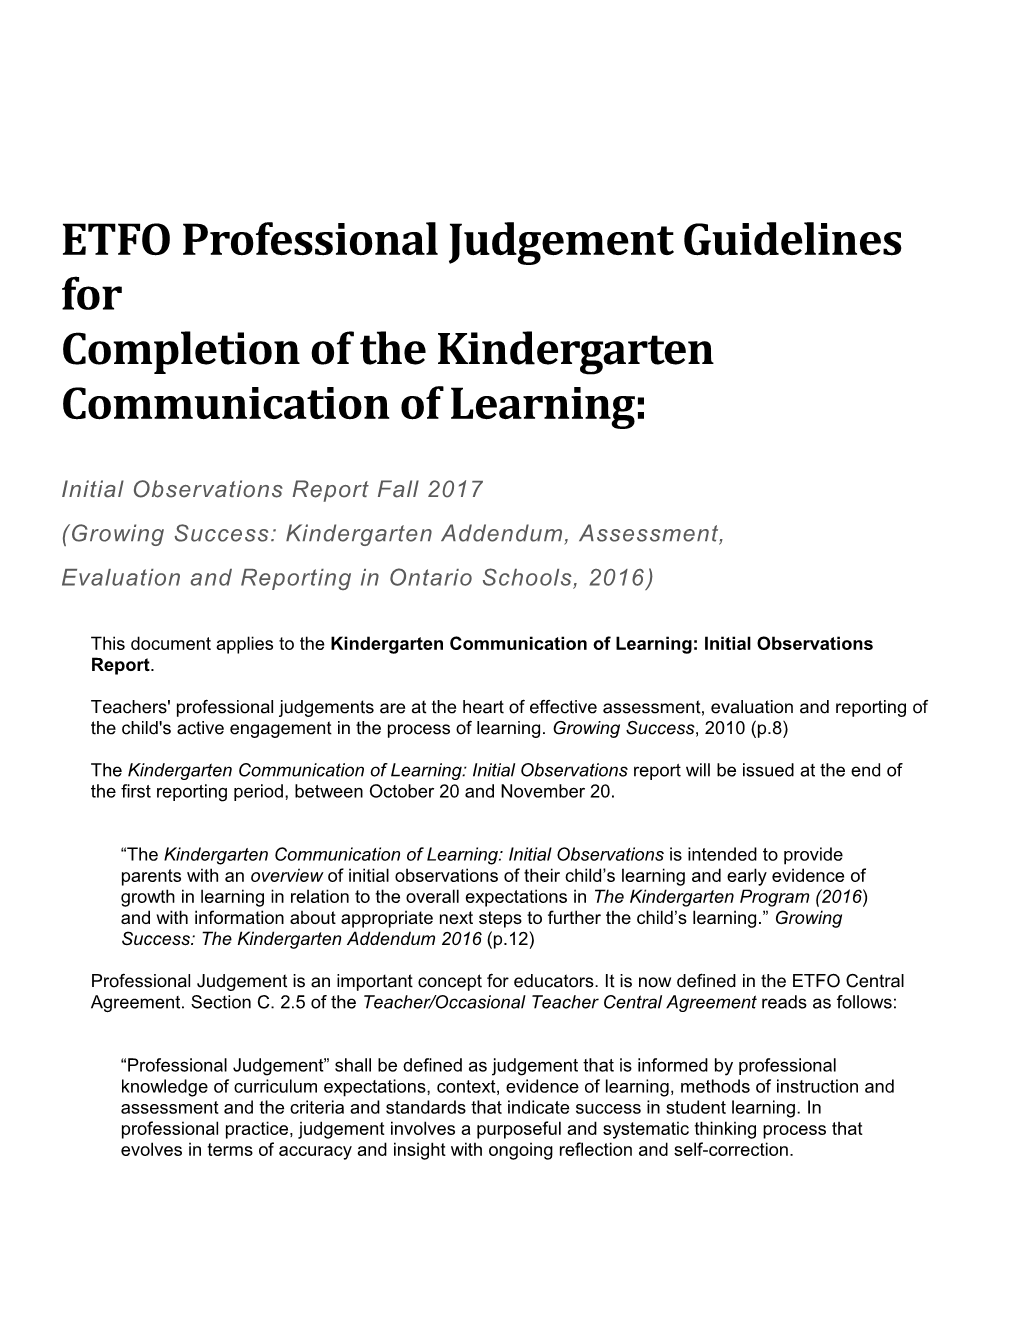 ETFO Professional Judgement Guidelines For